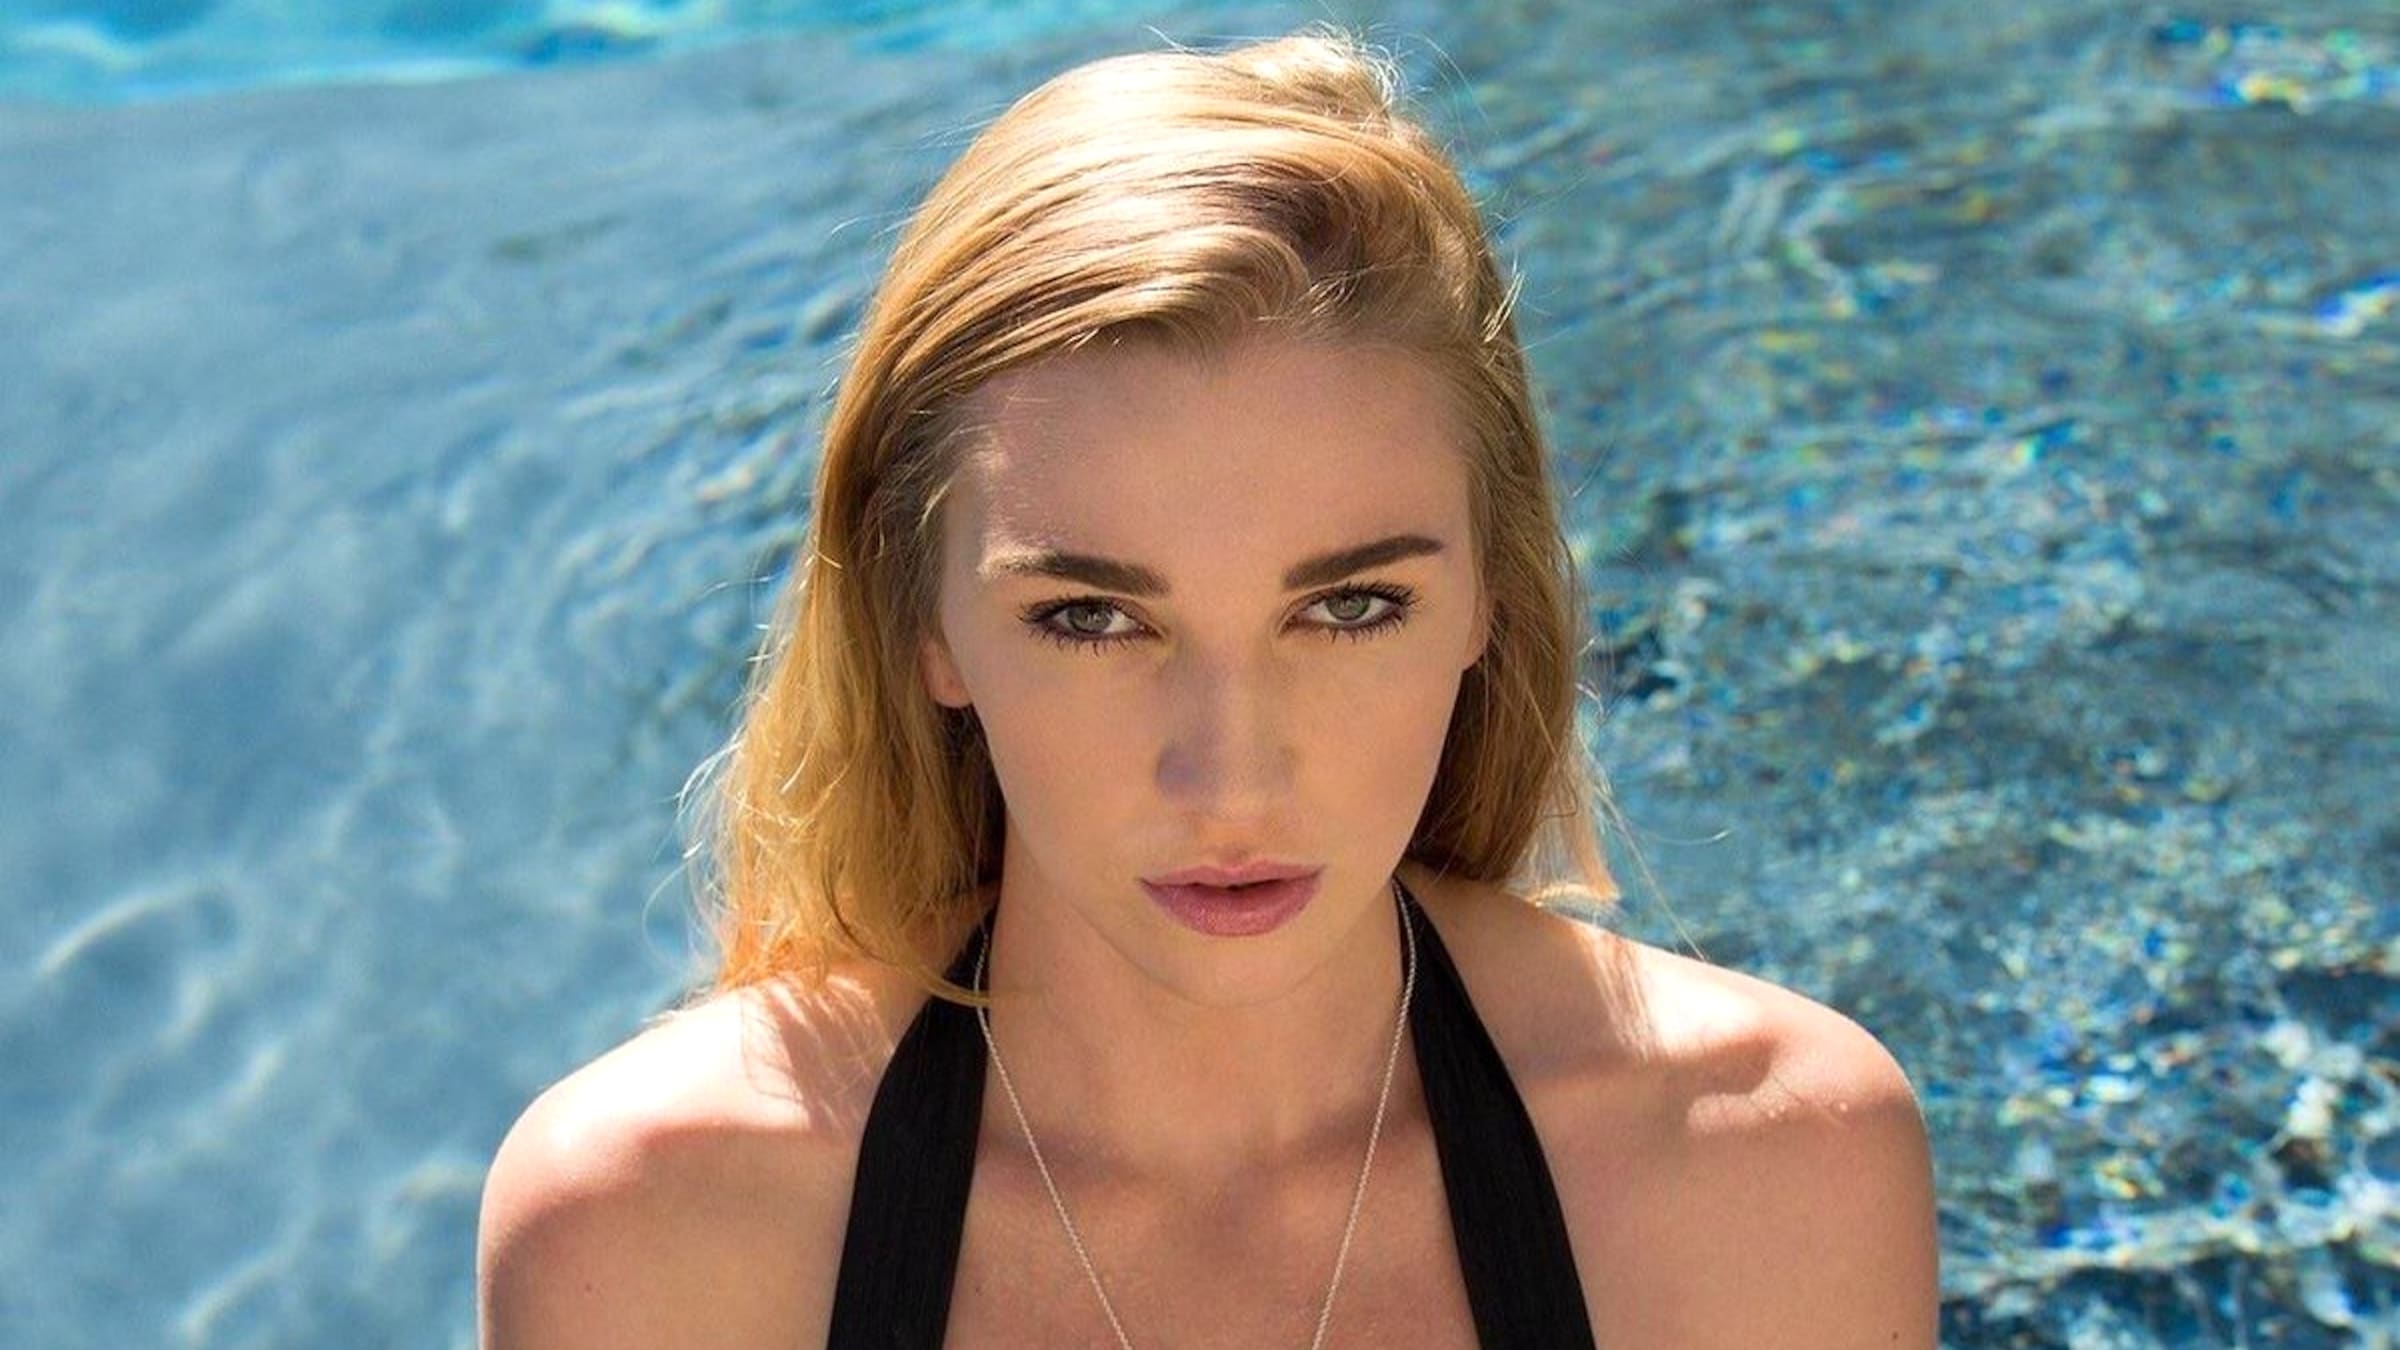 Porn Star Kendra Sunderland Booted Off Instagram After Joking About Sex With CEO Adam Mosseri pic